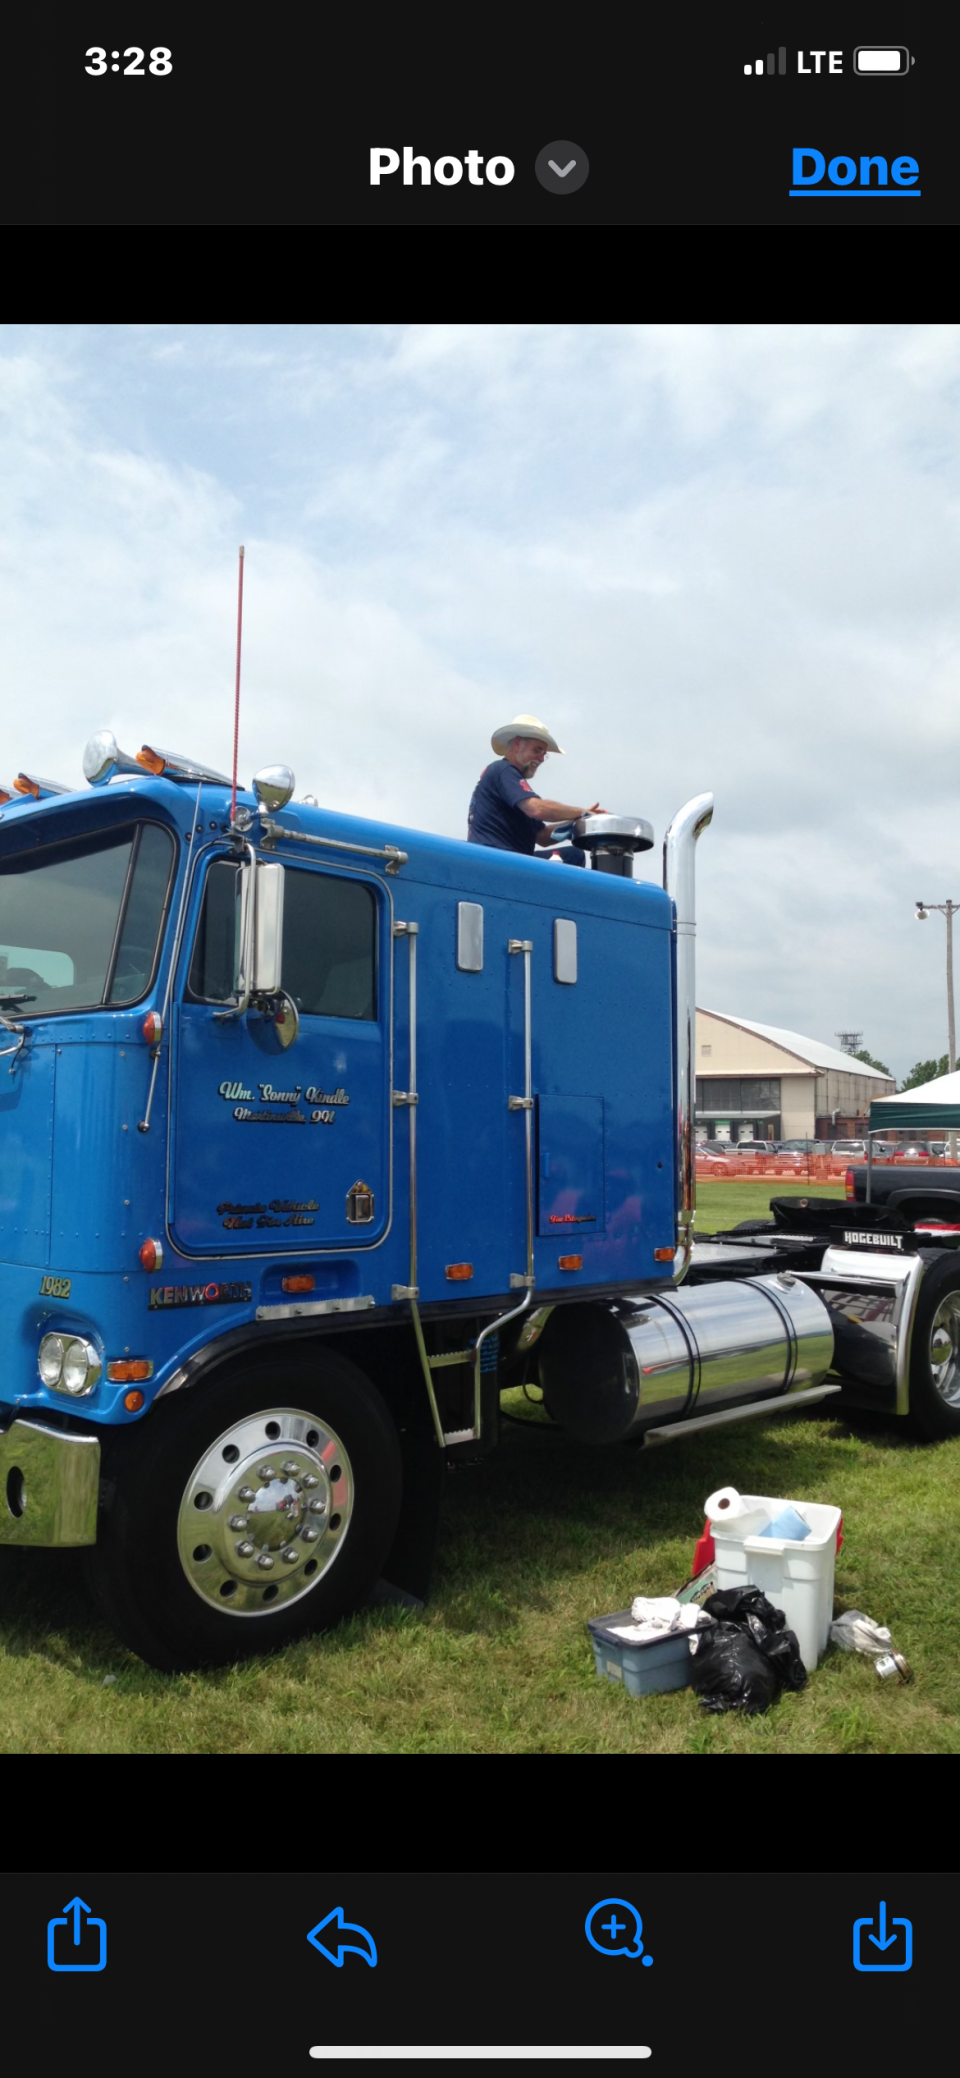 Chet Kindle with the 1982 Kenworth semi-truck cab he turned into a show truck after his father's death in 2010. His dad passed away before he could finish customizing the cab.